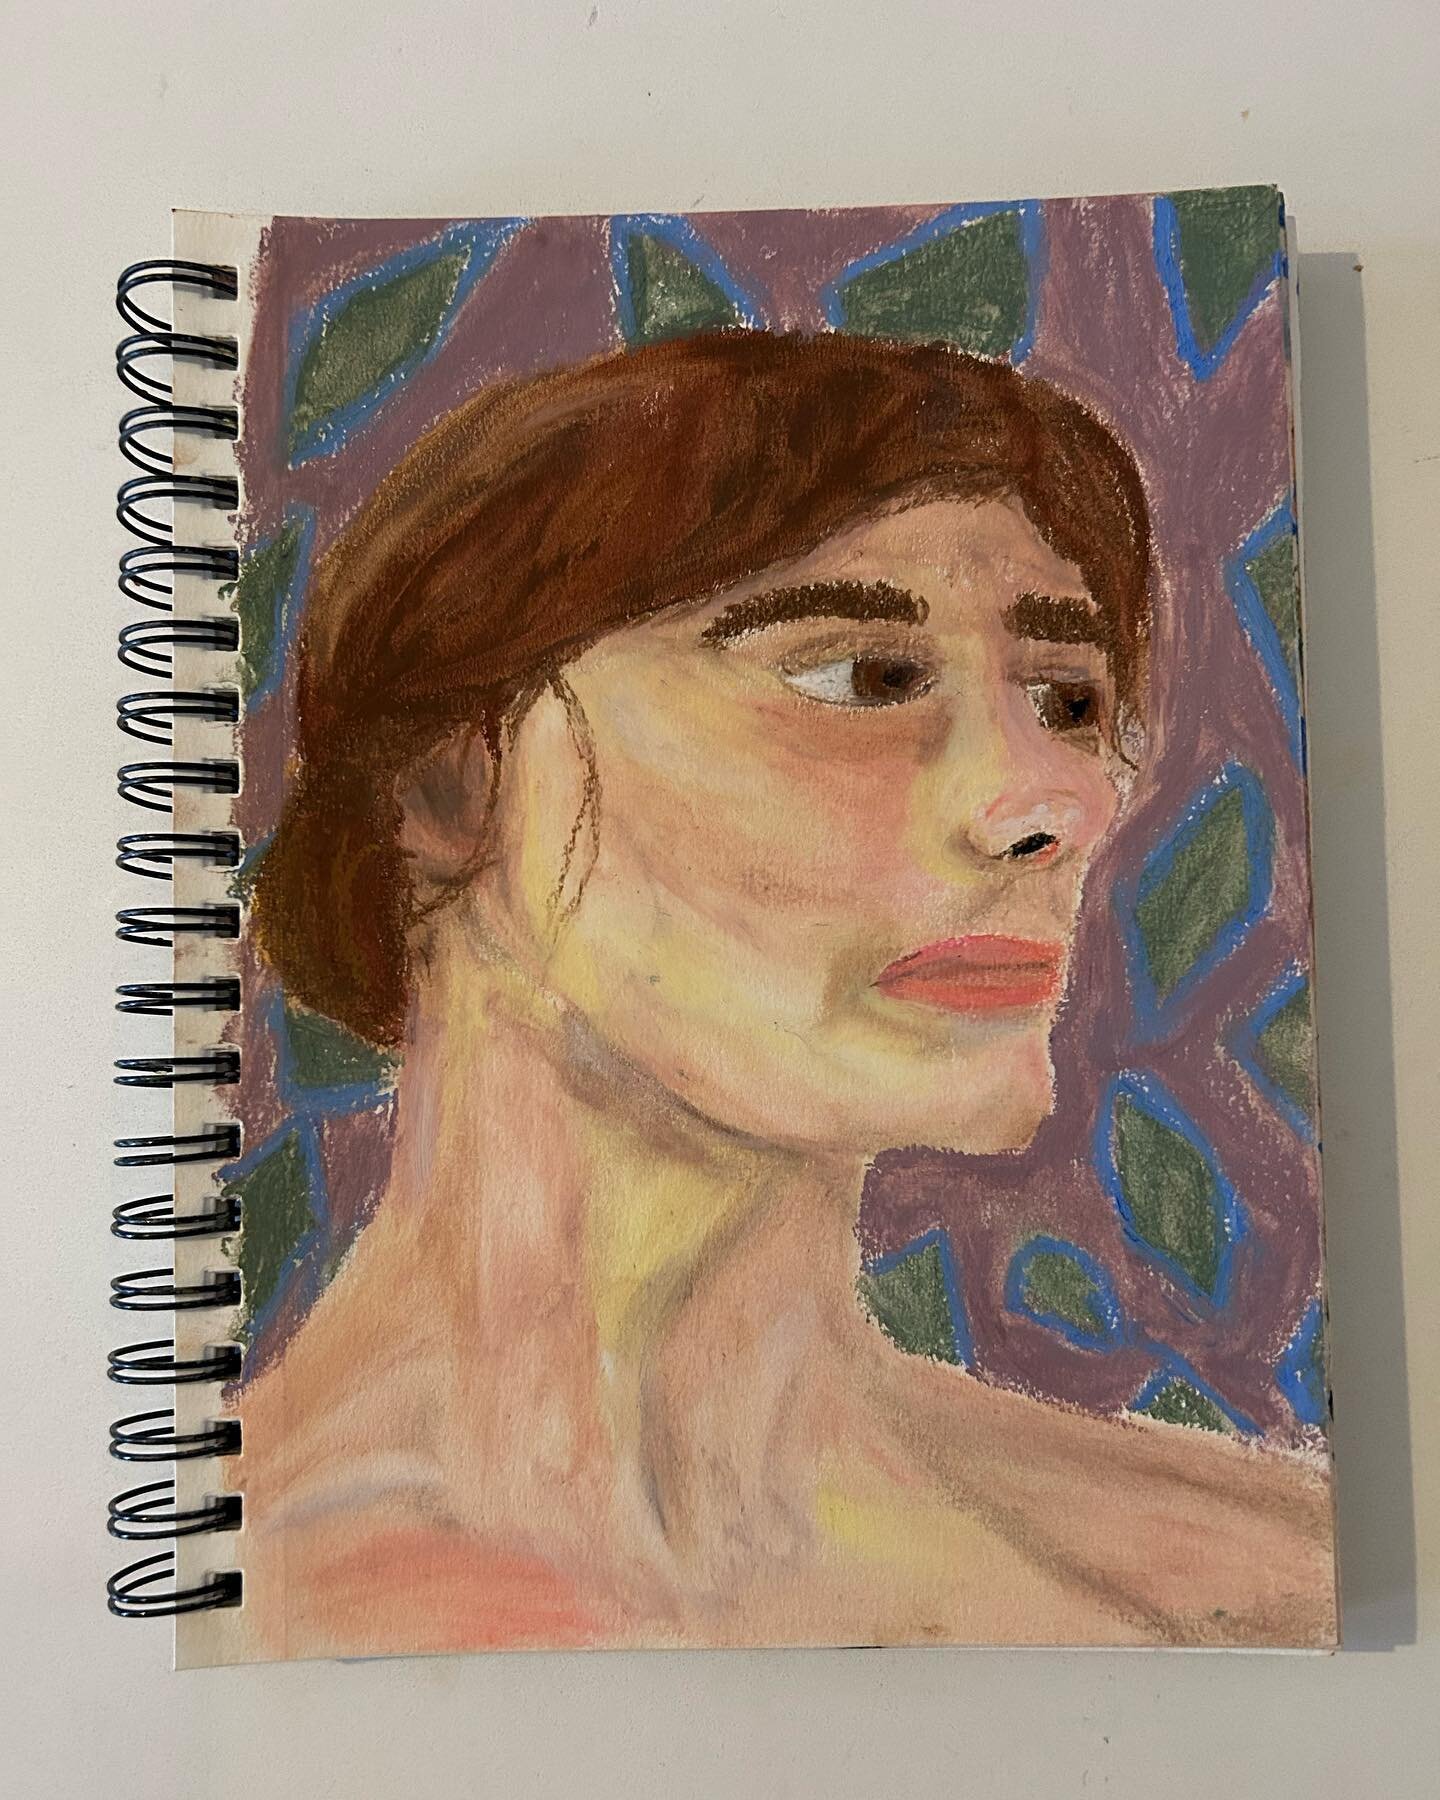 in the carriage - oil pastels on 7x10 mixed media paper 

i can feel myself improving with every piece! my favorite part is adding all the different colors into the skin tone🪡
&bull;
&bull;
&bull;
&bull;
&bull;
&bull;
&bull;
&bull;
&bull;
#oilpastel